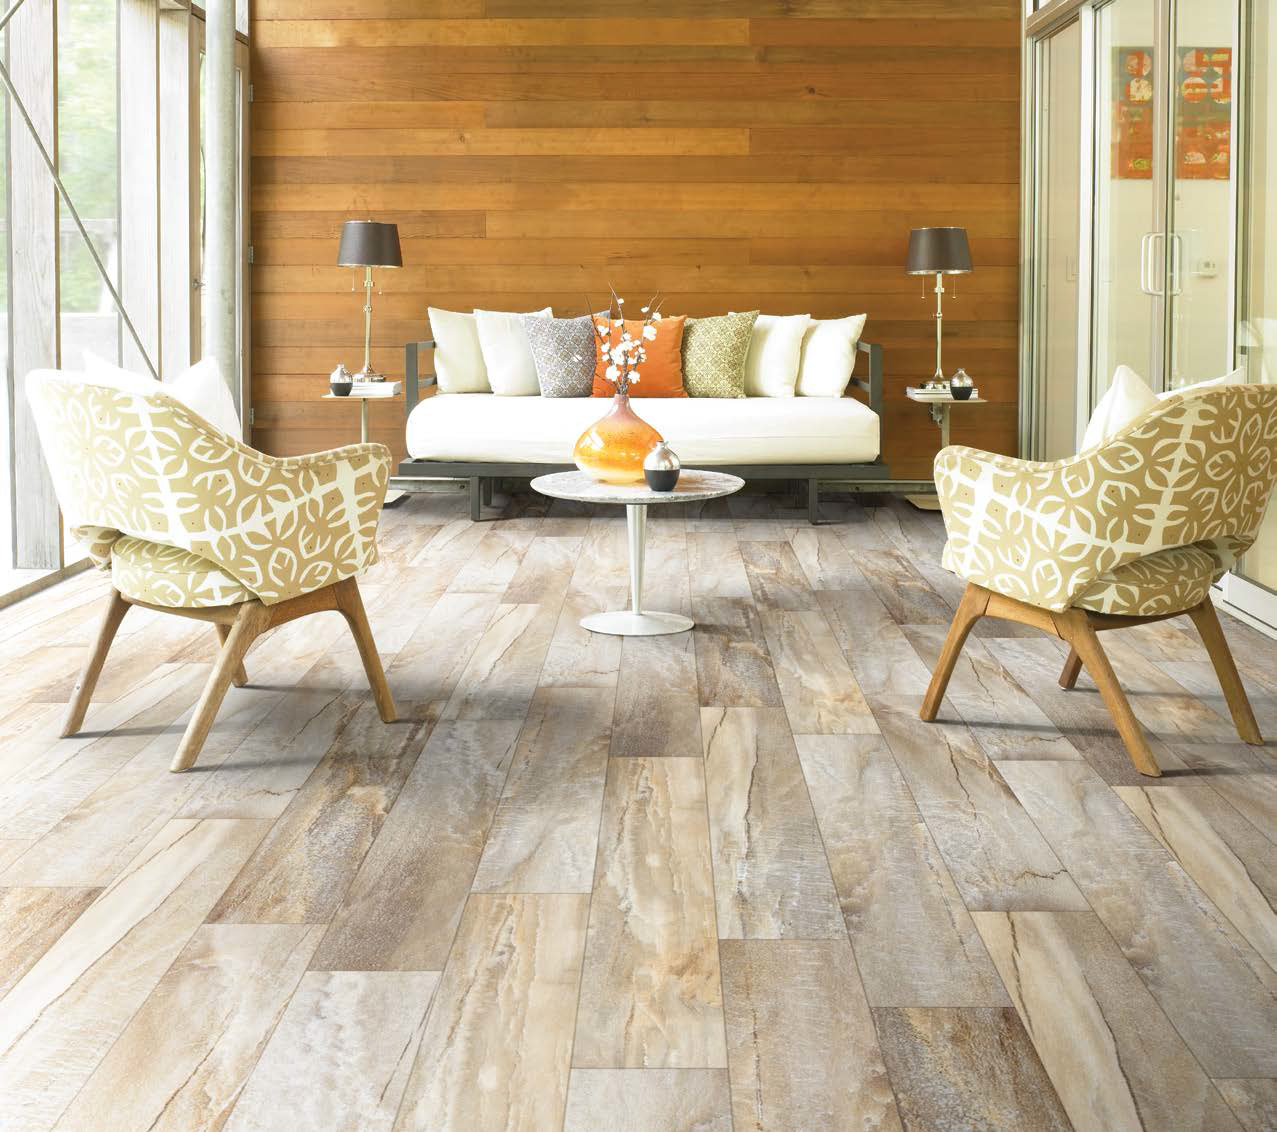 How to Select a Thickness for Your Luxury Vinyl Plank Flooring 2